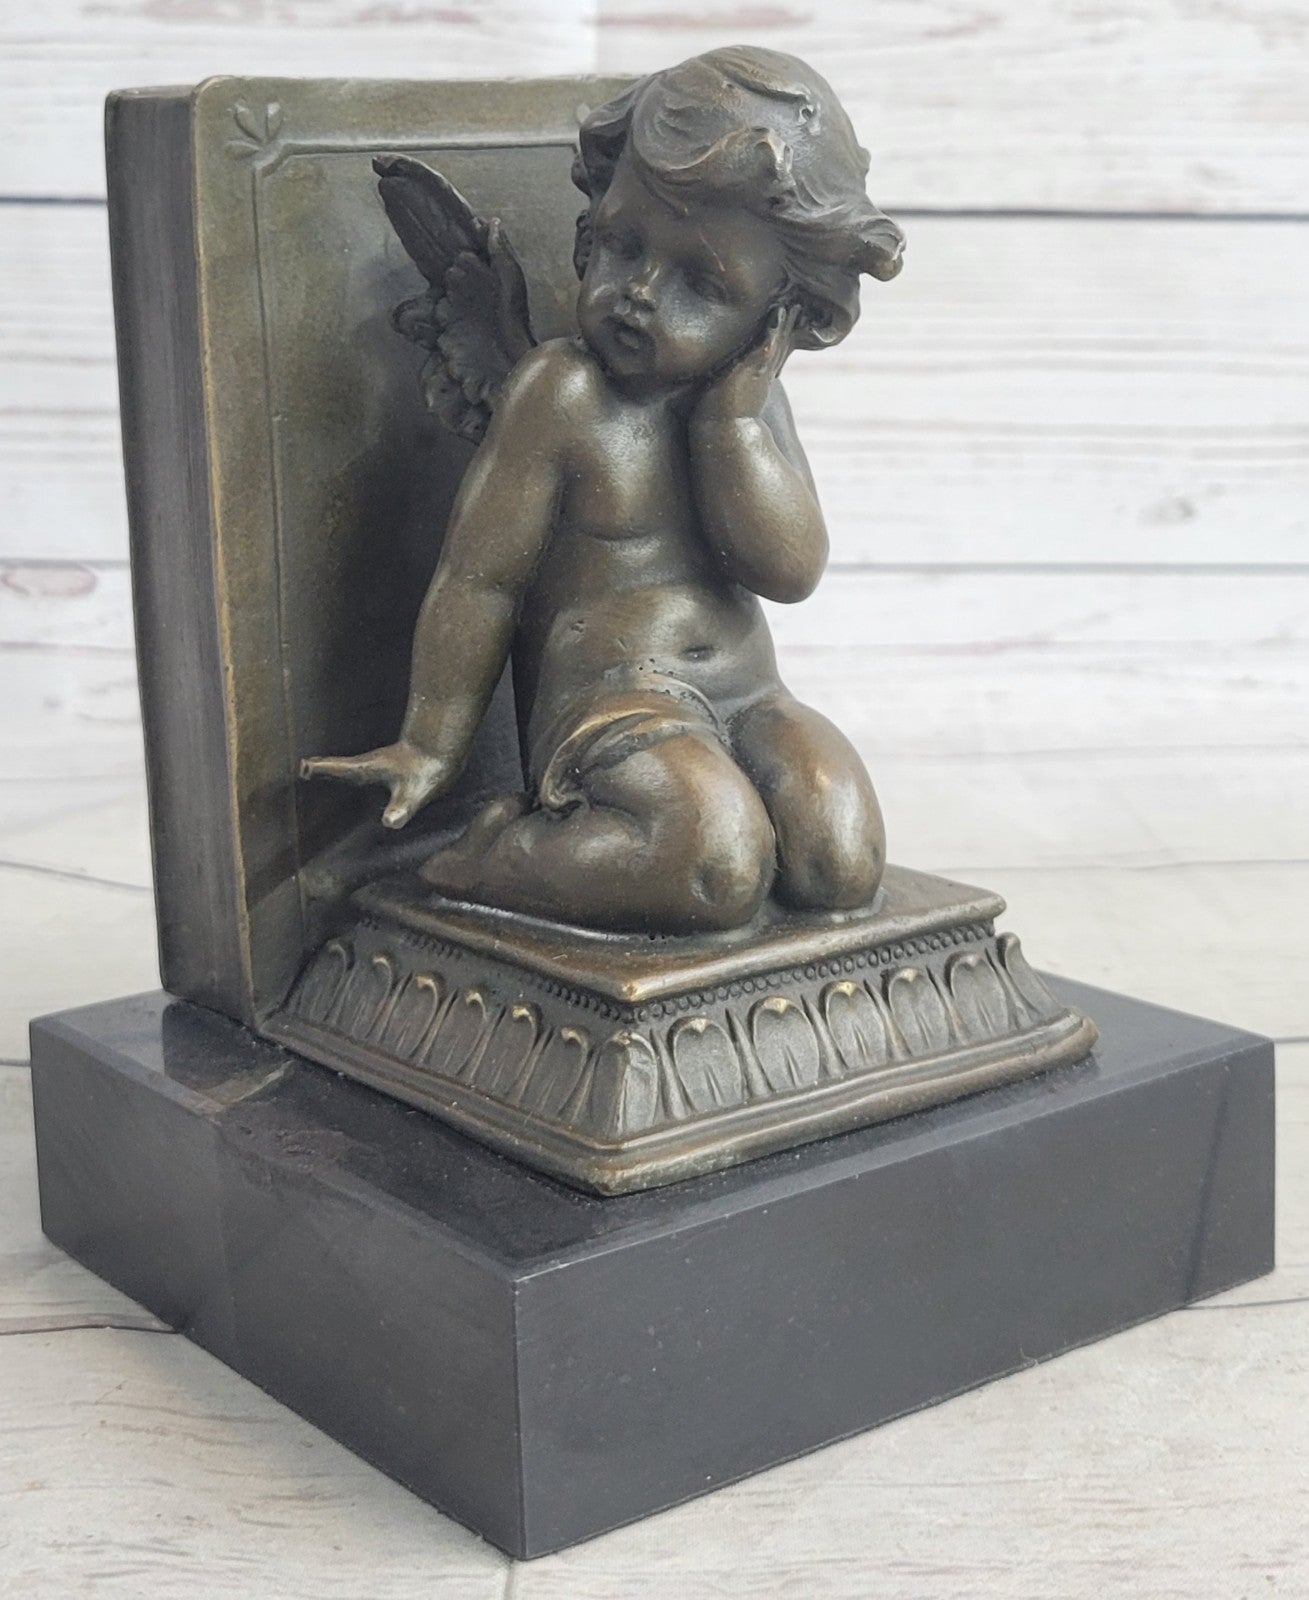 Hot Cast Angel With Wings Bookends Bronze Sculpture by Moreau Figurine Figure